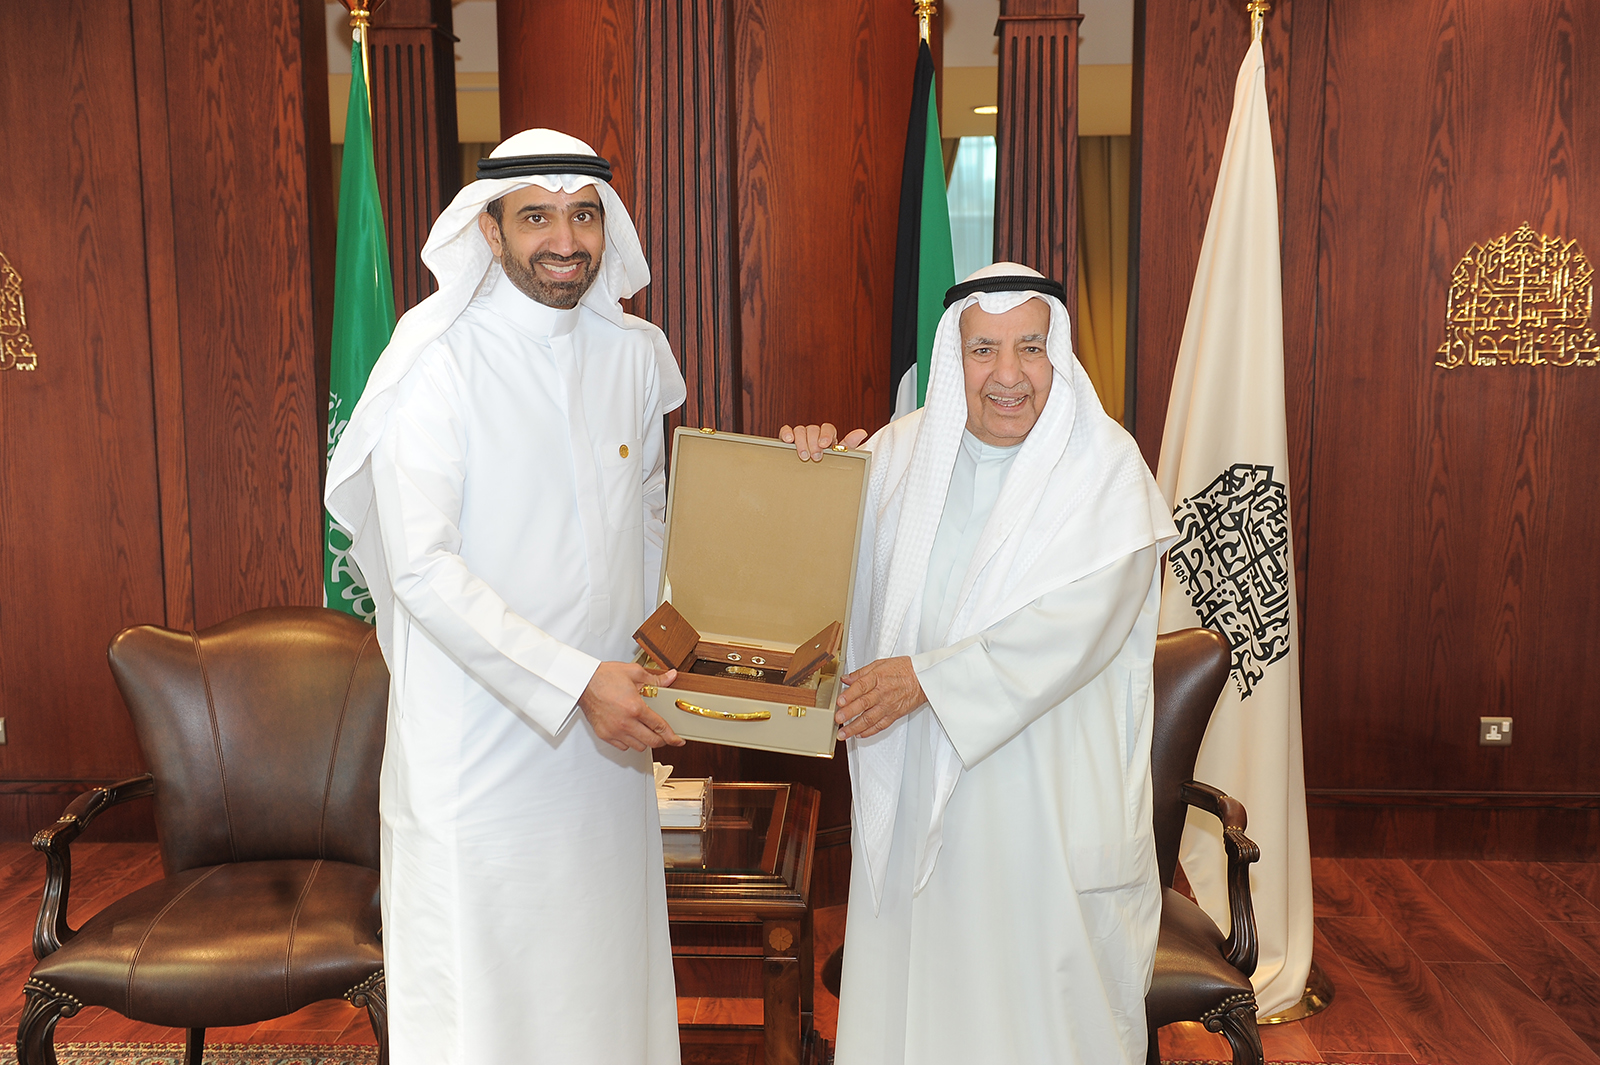 The President of Kuwait Chamber of Commerce and Industry (KCCI) Ali Al-Ghanim with Chairman of the Council of Saudi Chambers (CSC) Ahmad Al-Rajhi